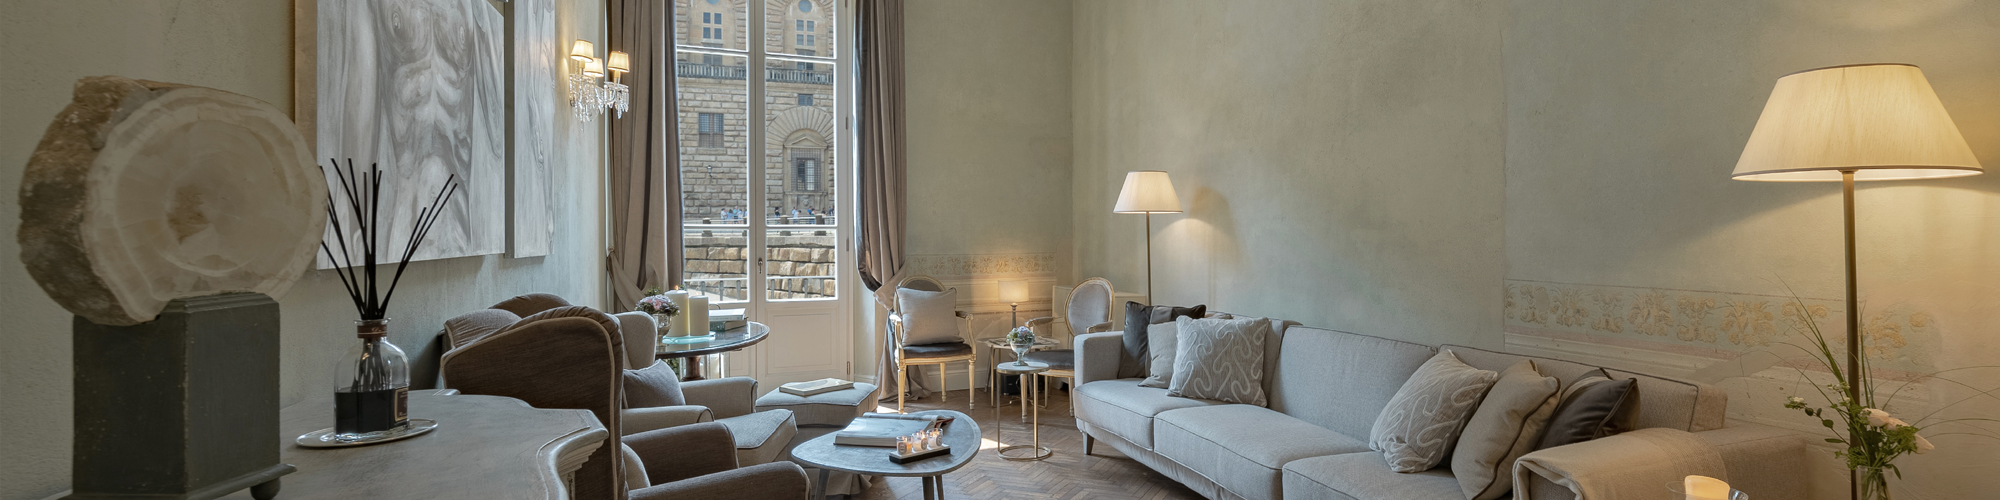 A modern living area with an ancient flavor in the Pitti Historical Home apartment